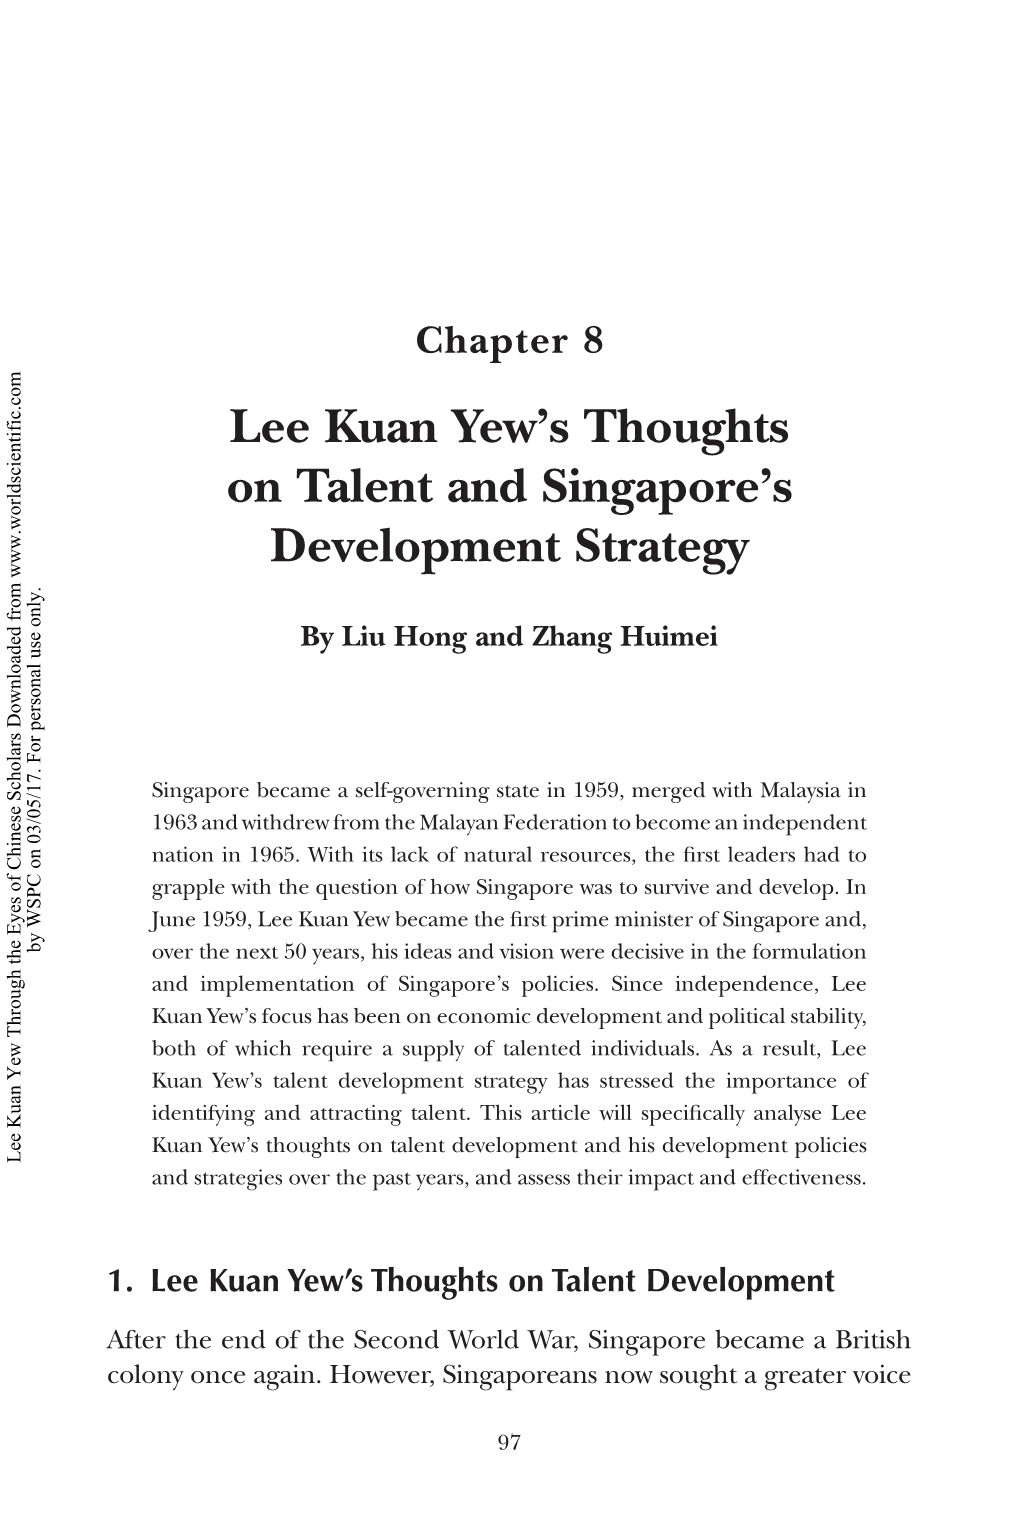 Lee Kuan Yew's Thoughts on Talent and Singapore's Development